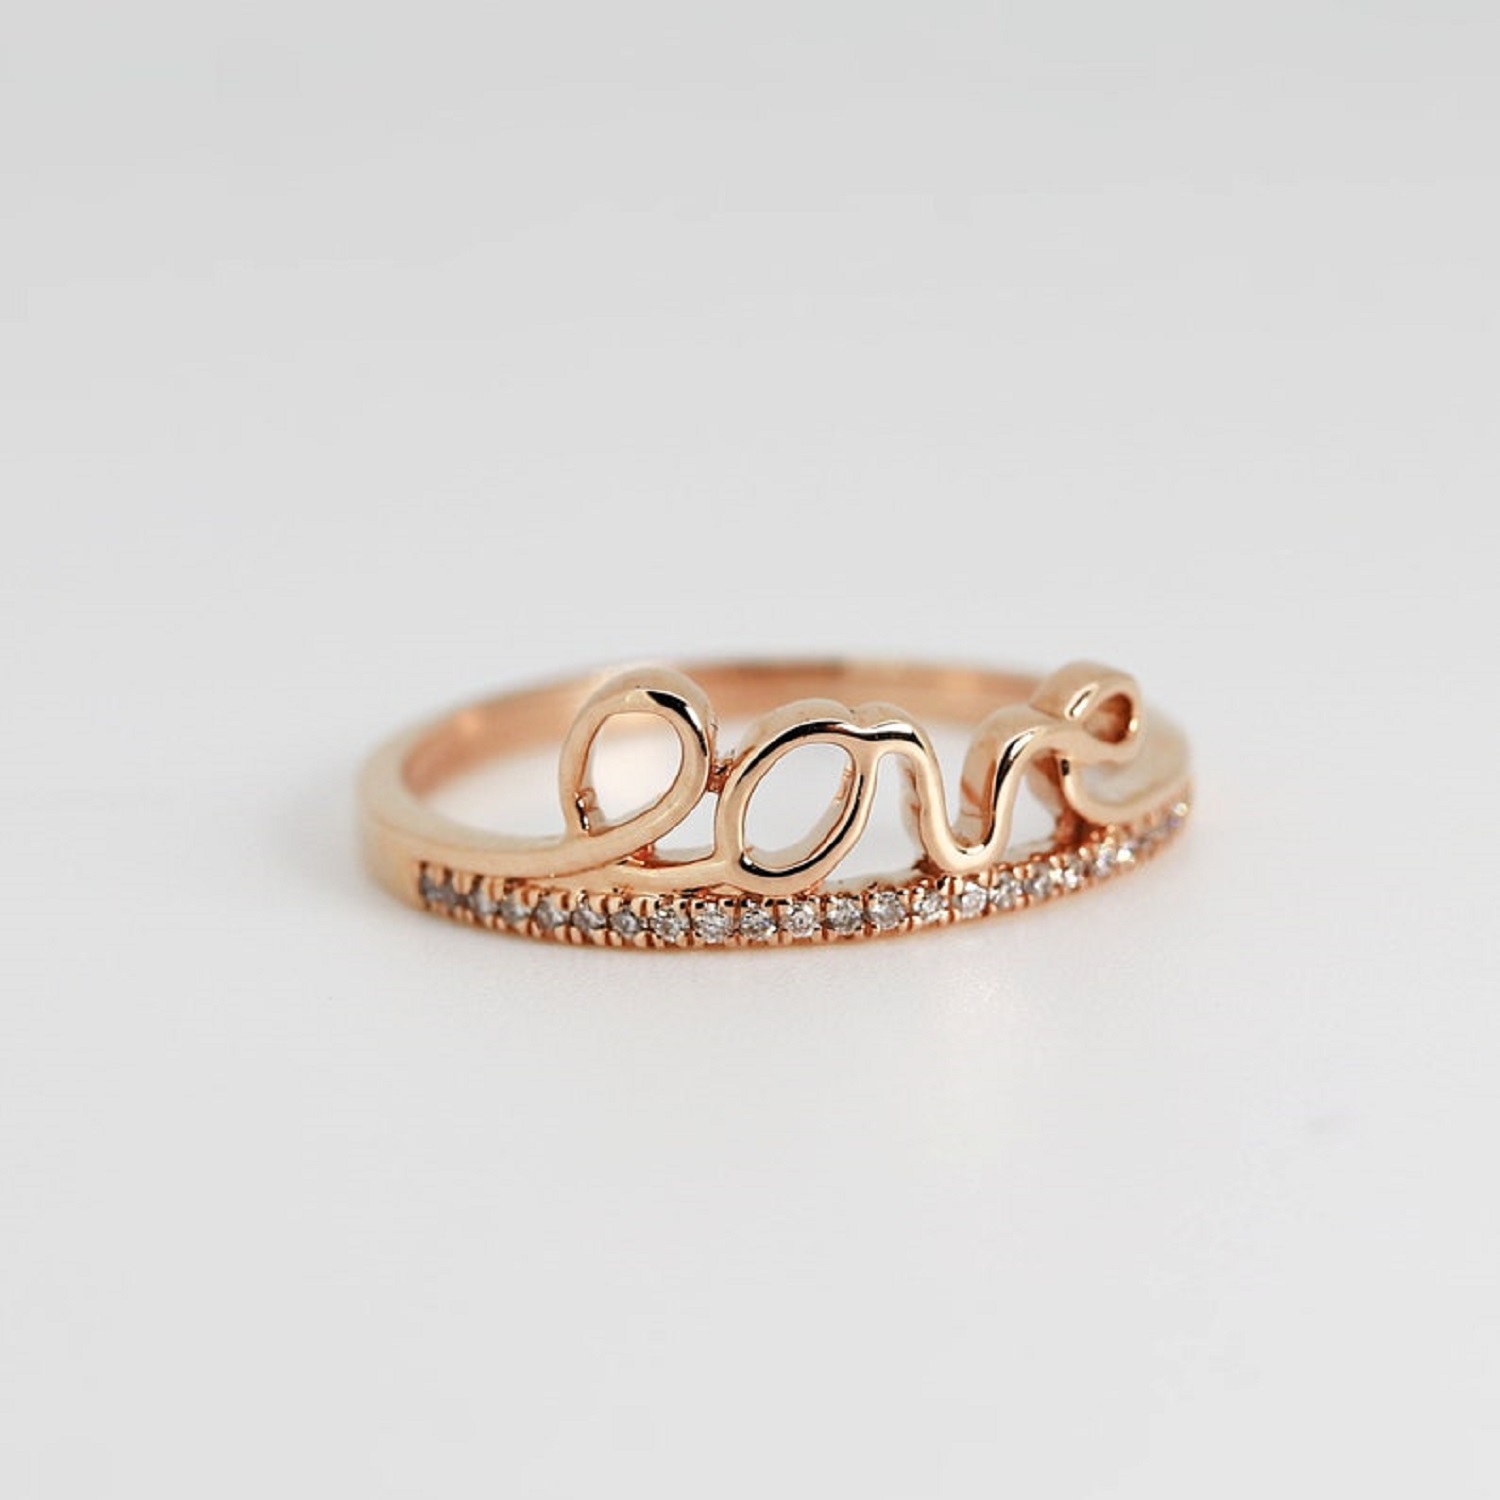 What should You Engrave on Your Engagement Ring?